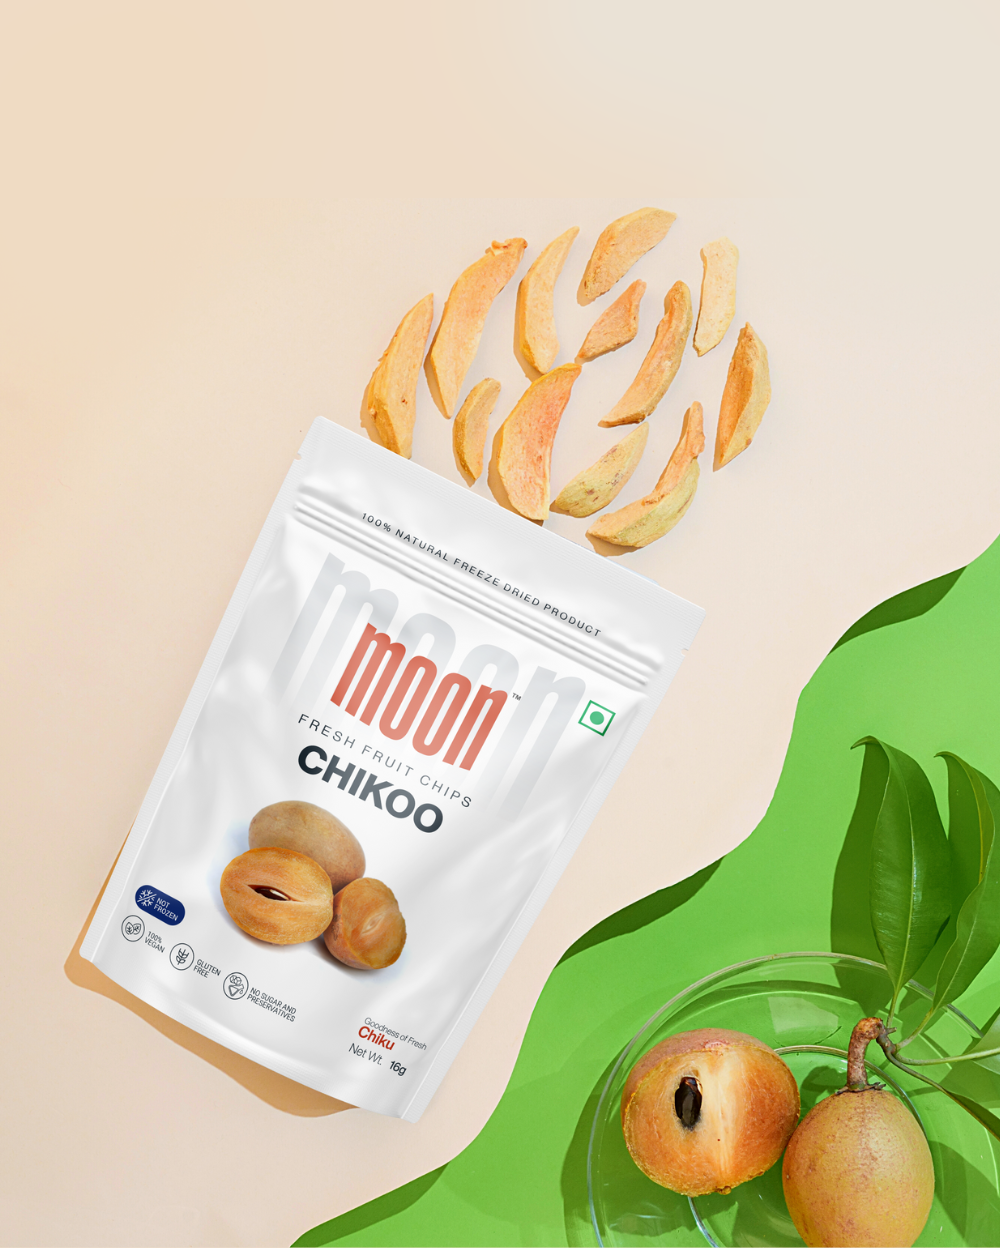 A package of MOONFREEZE FOODS PRIVATE LIMITED's Moon Freeze Dried Chikoo + Pineapple fruit slices, prominently featured alongside fresh chikoos and floating sliced pieces, is artfully presented against a dual-tone background.